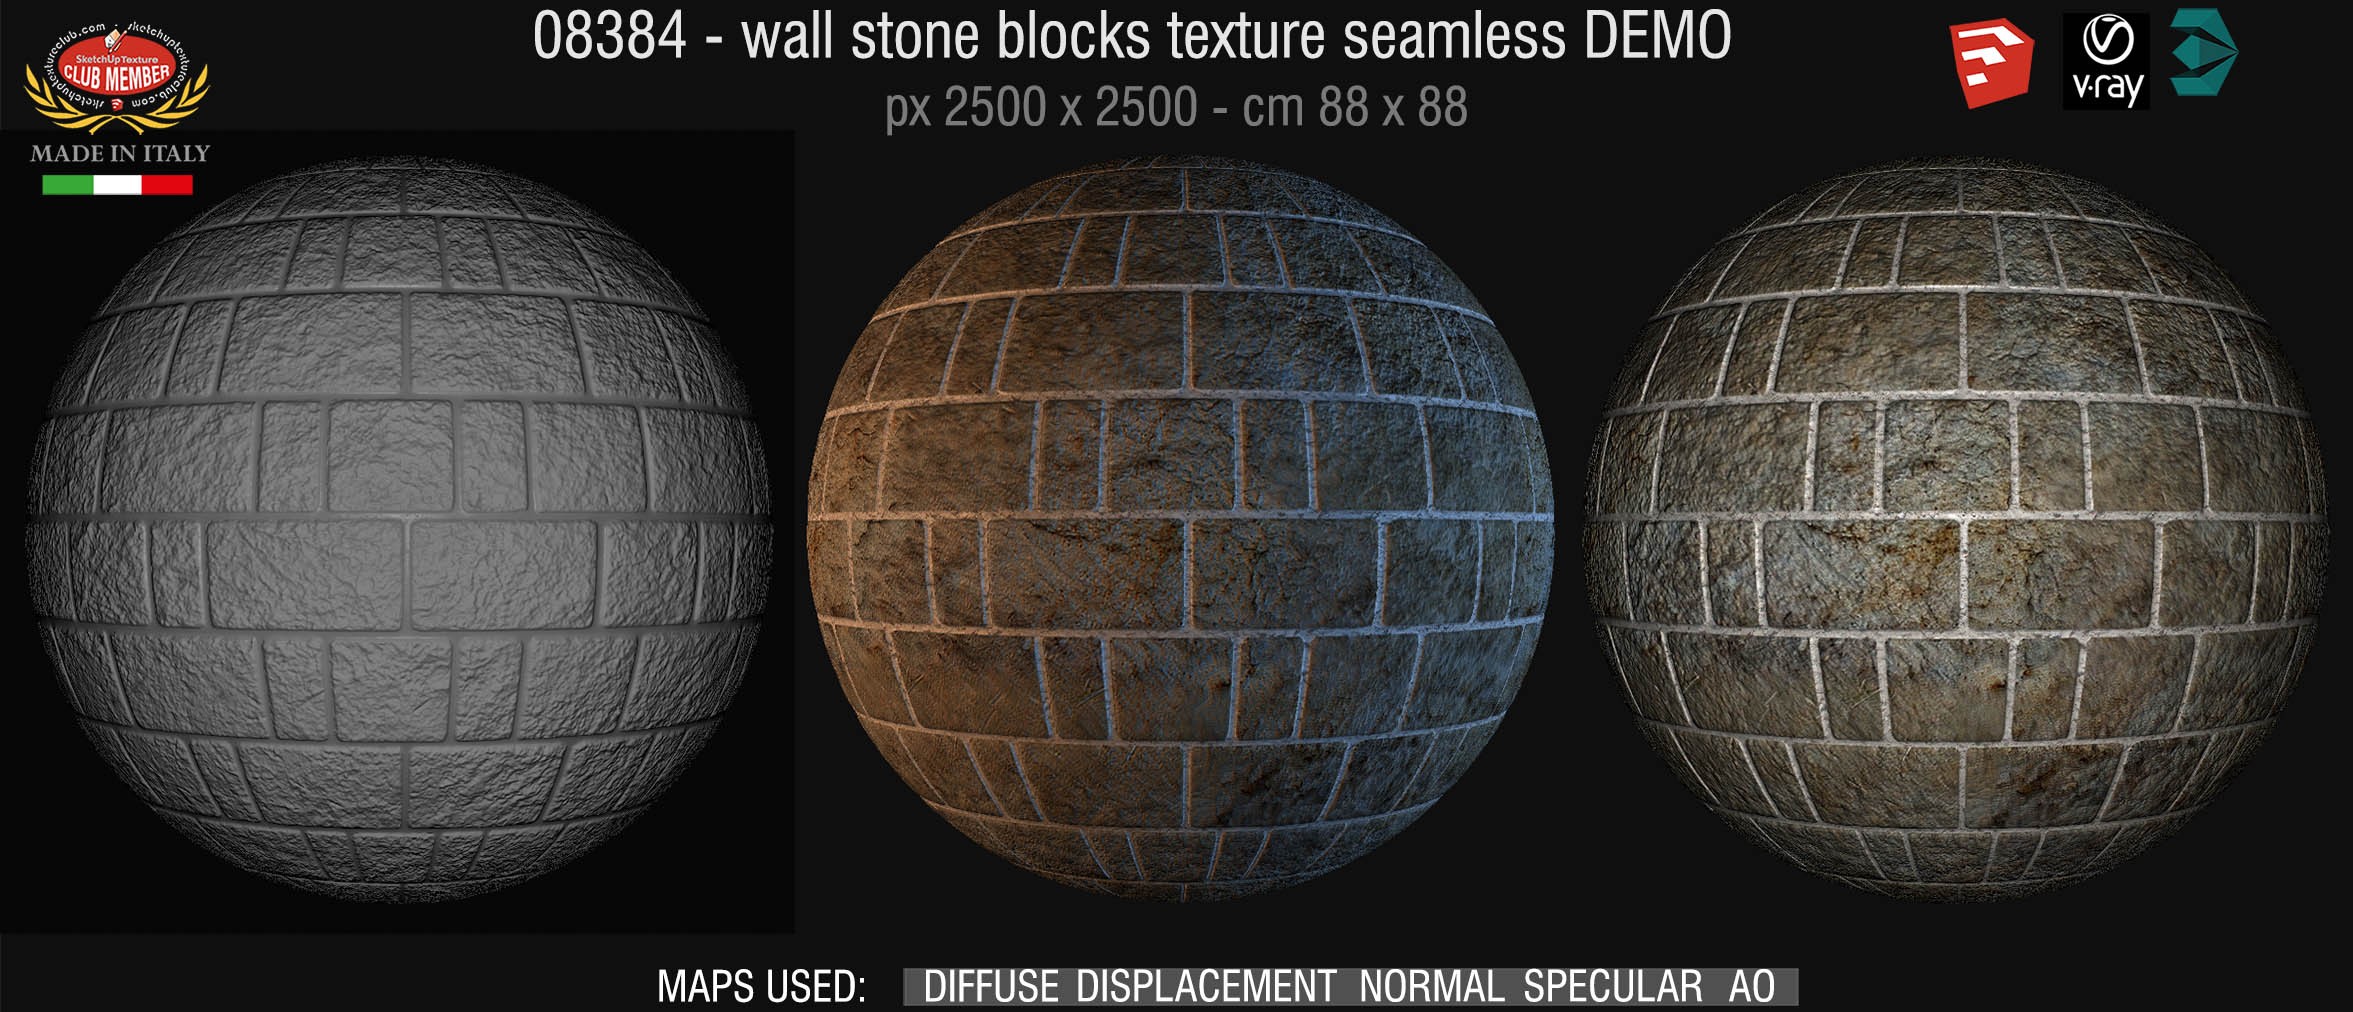 08384 HR Wall stone with regular blocks texture + maps DEMO